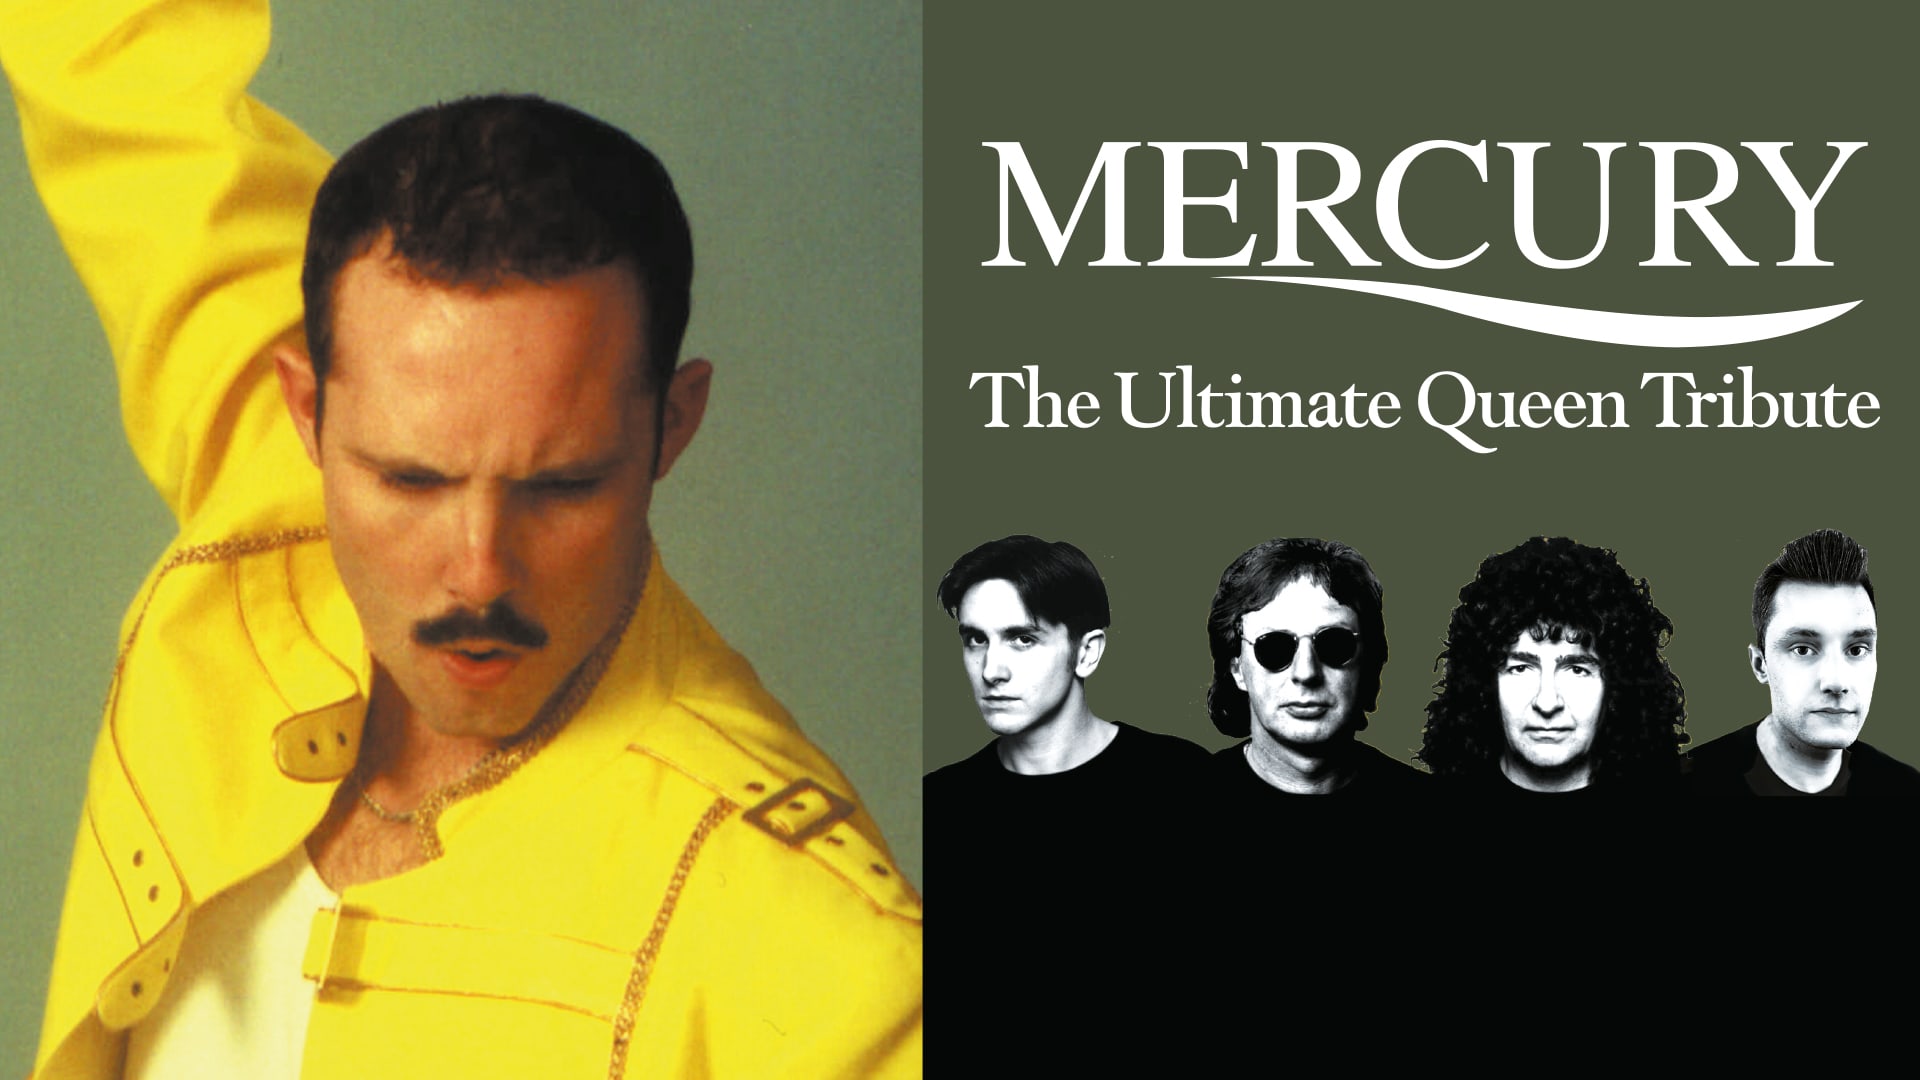 Mercury - The Ultimate Queen Tribute at Grand Opera House York